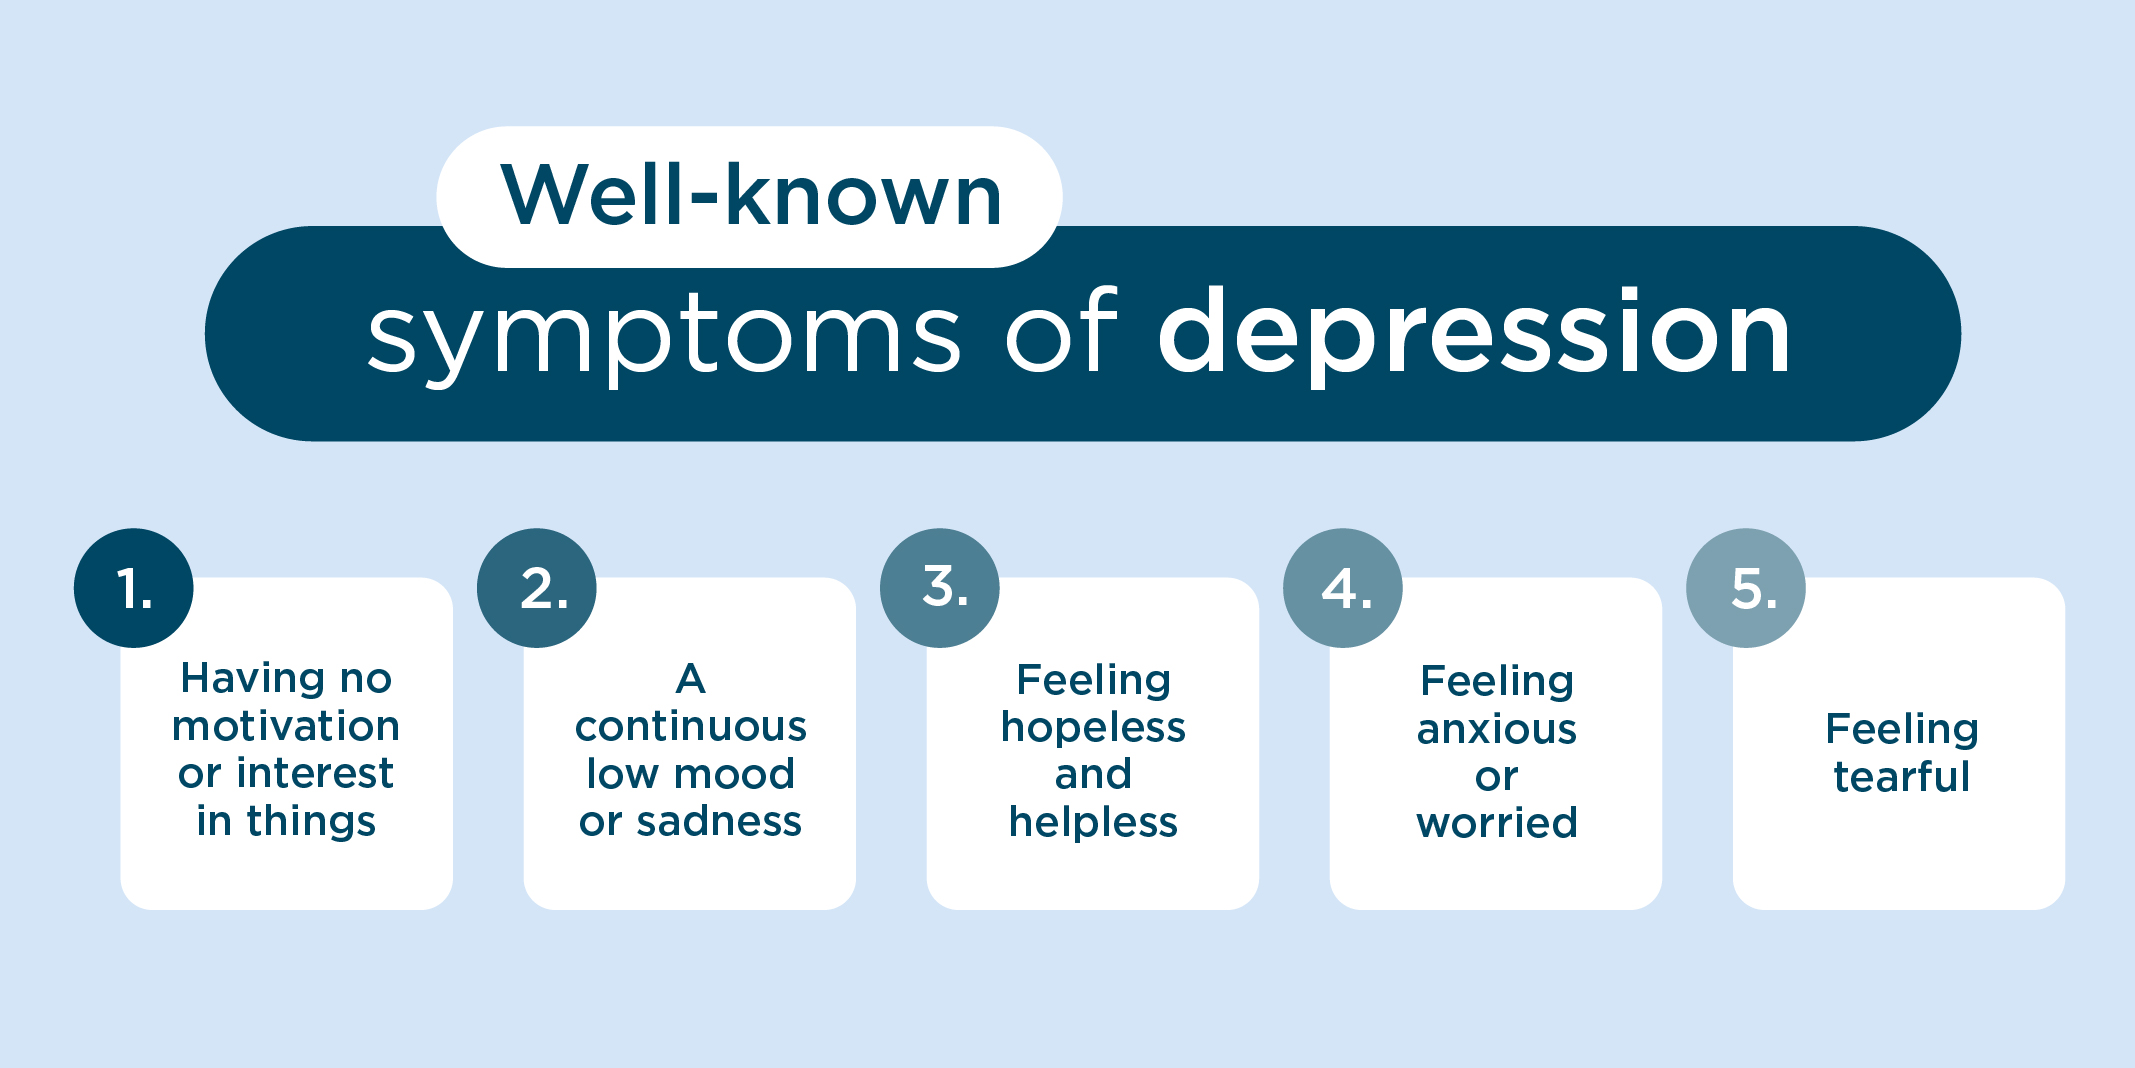 most known symptoms of depression